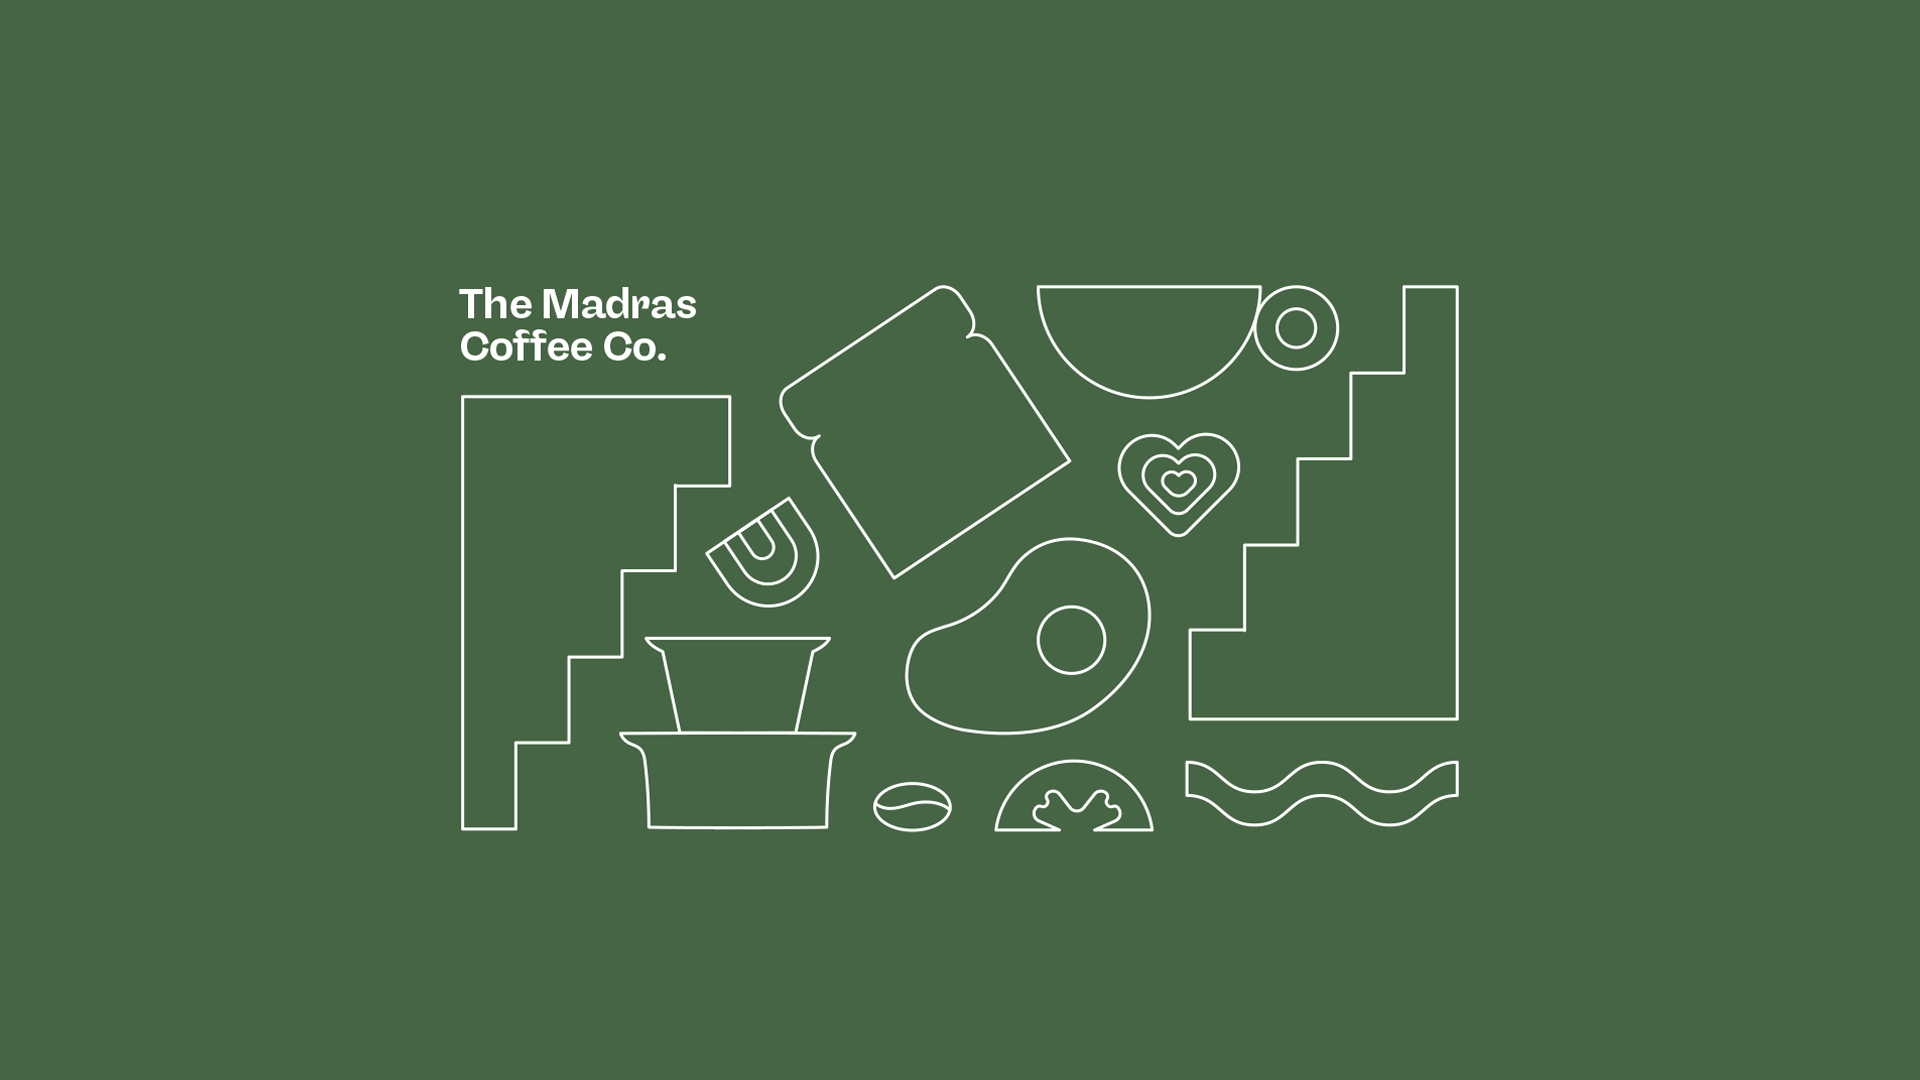 The Madras Coffee Co. - Branding & Packaging animation branding breakfast cafe branding coffee coffee bean coffee logo eco friendly filter coffee graphic design historic illustration indian coffee logo madras coffee menu design packaging restaurant social media ui